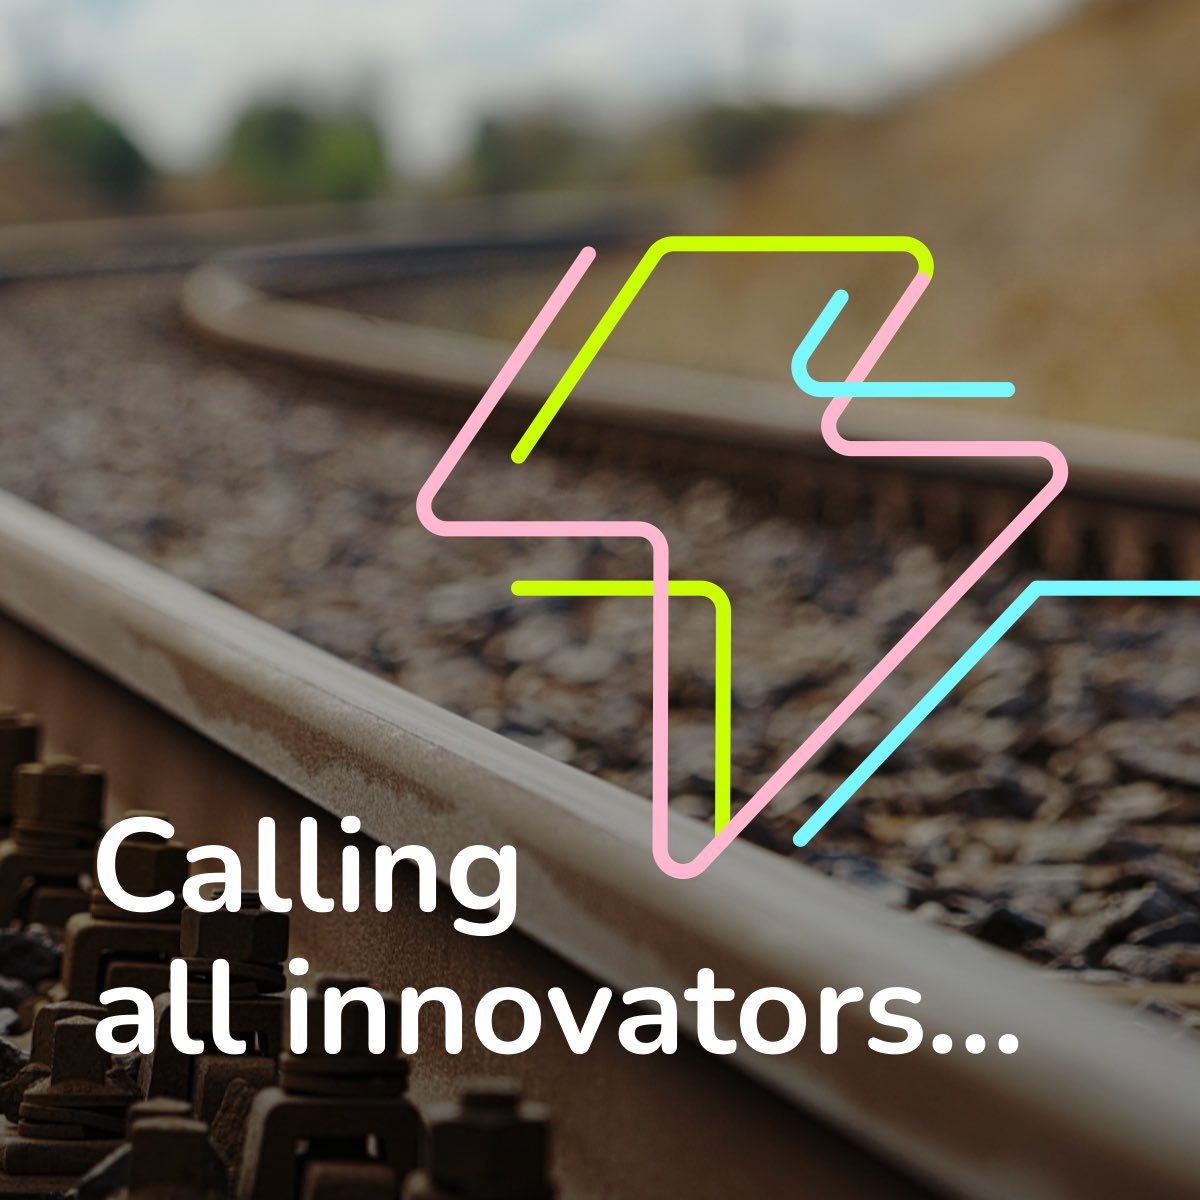 Calling all tech startups! Over the past 4 years, @LNER’s #FutureLabs programme has introduced and trialled some game-changers for the railway - including at-seat food ordering, growing algae to capture CO2, and indoor navigation apps. Now @LNER, @northernassist, @Se_Railway &